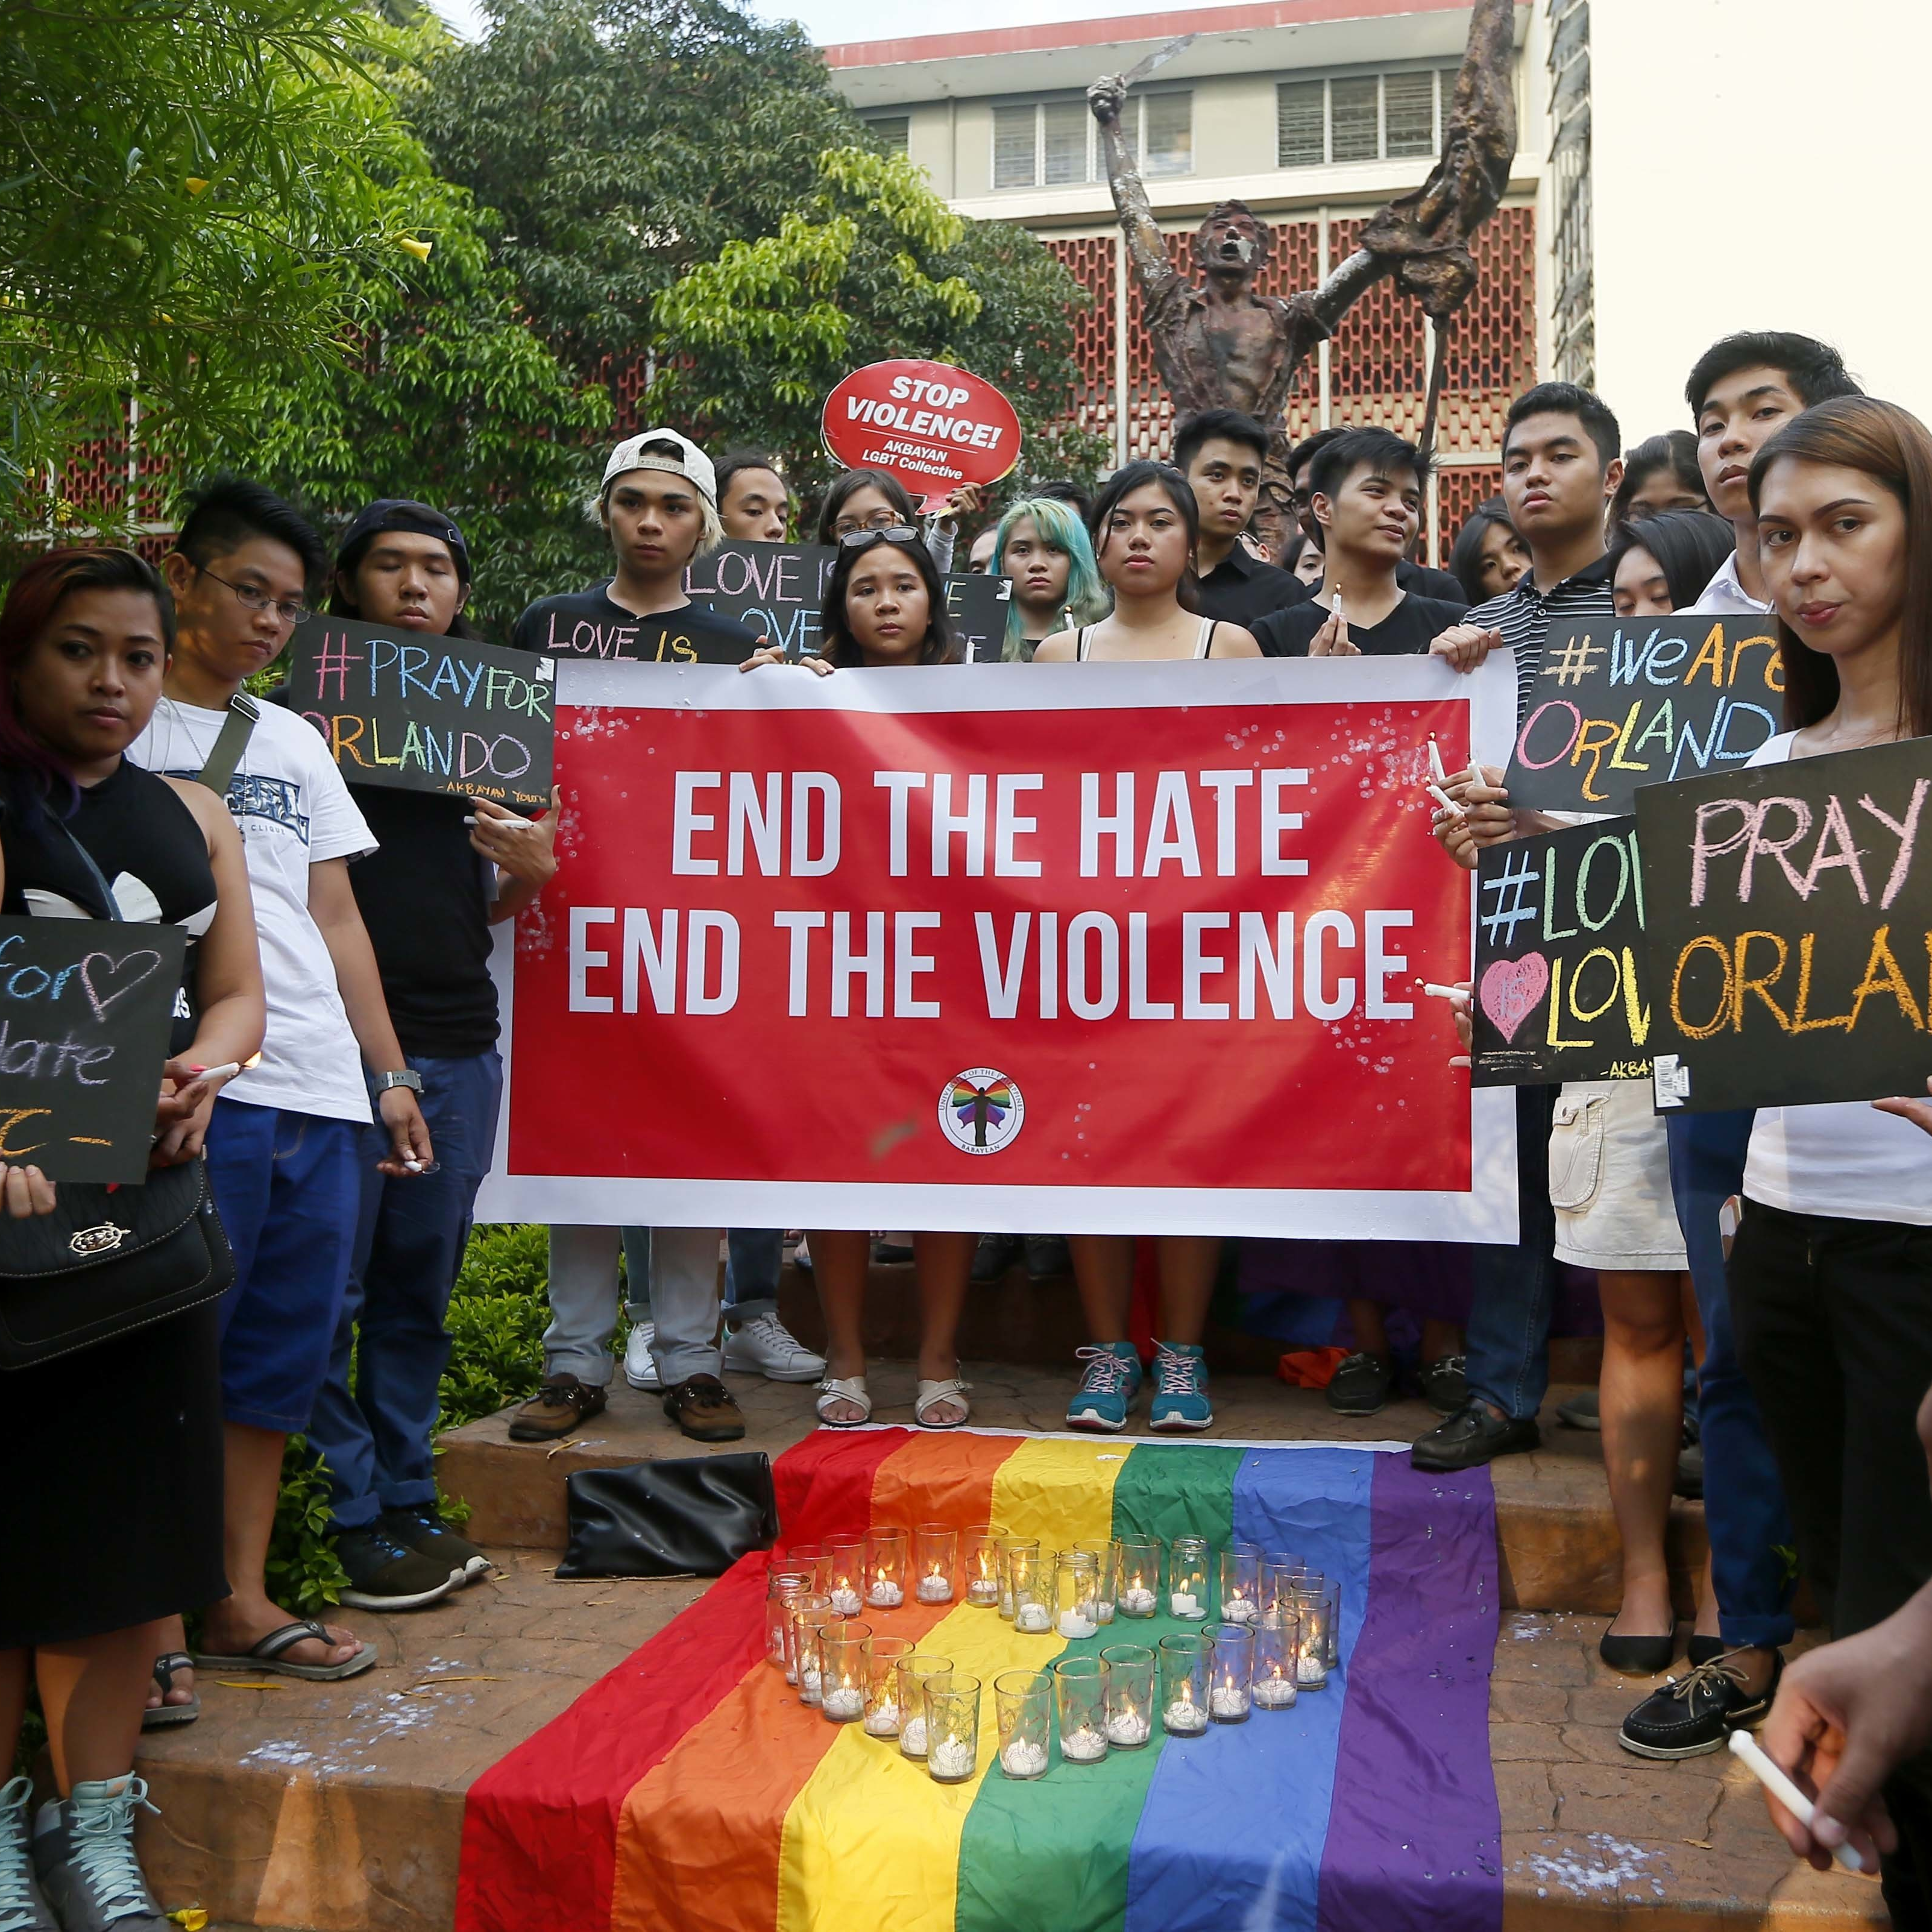 Philippine bishops after Catholics to be tolerant in wake of Orlando shootings